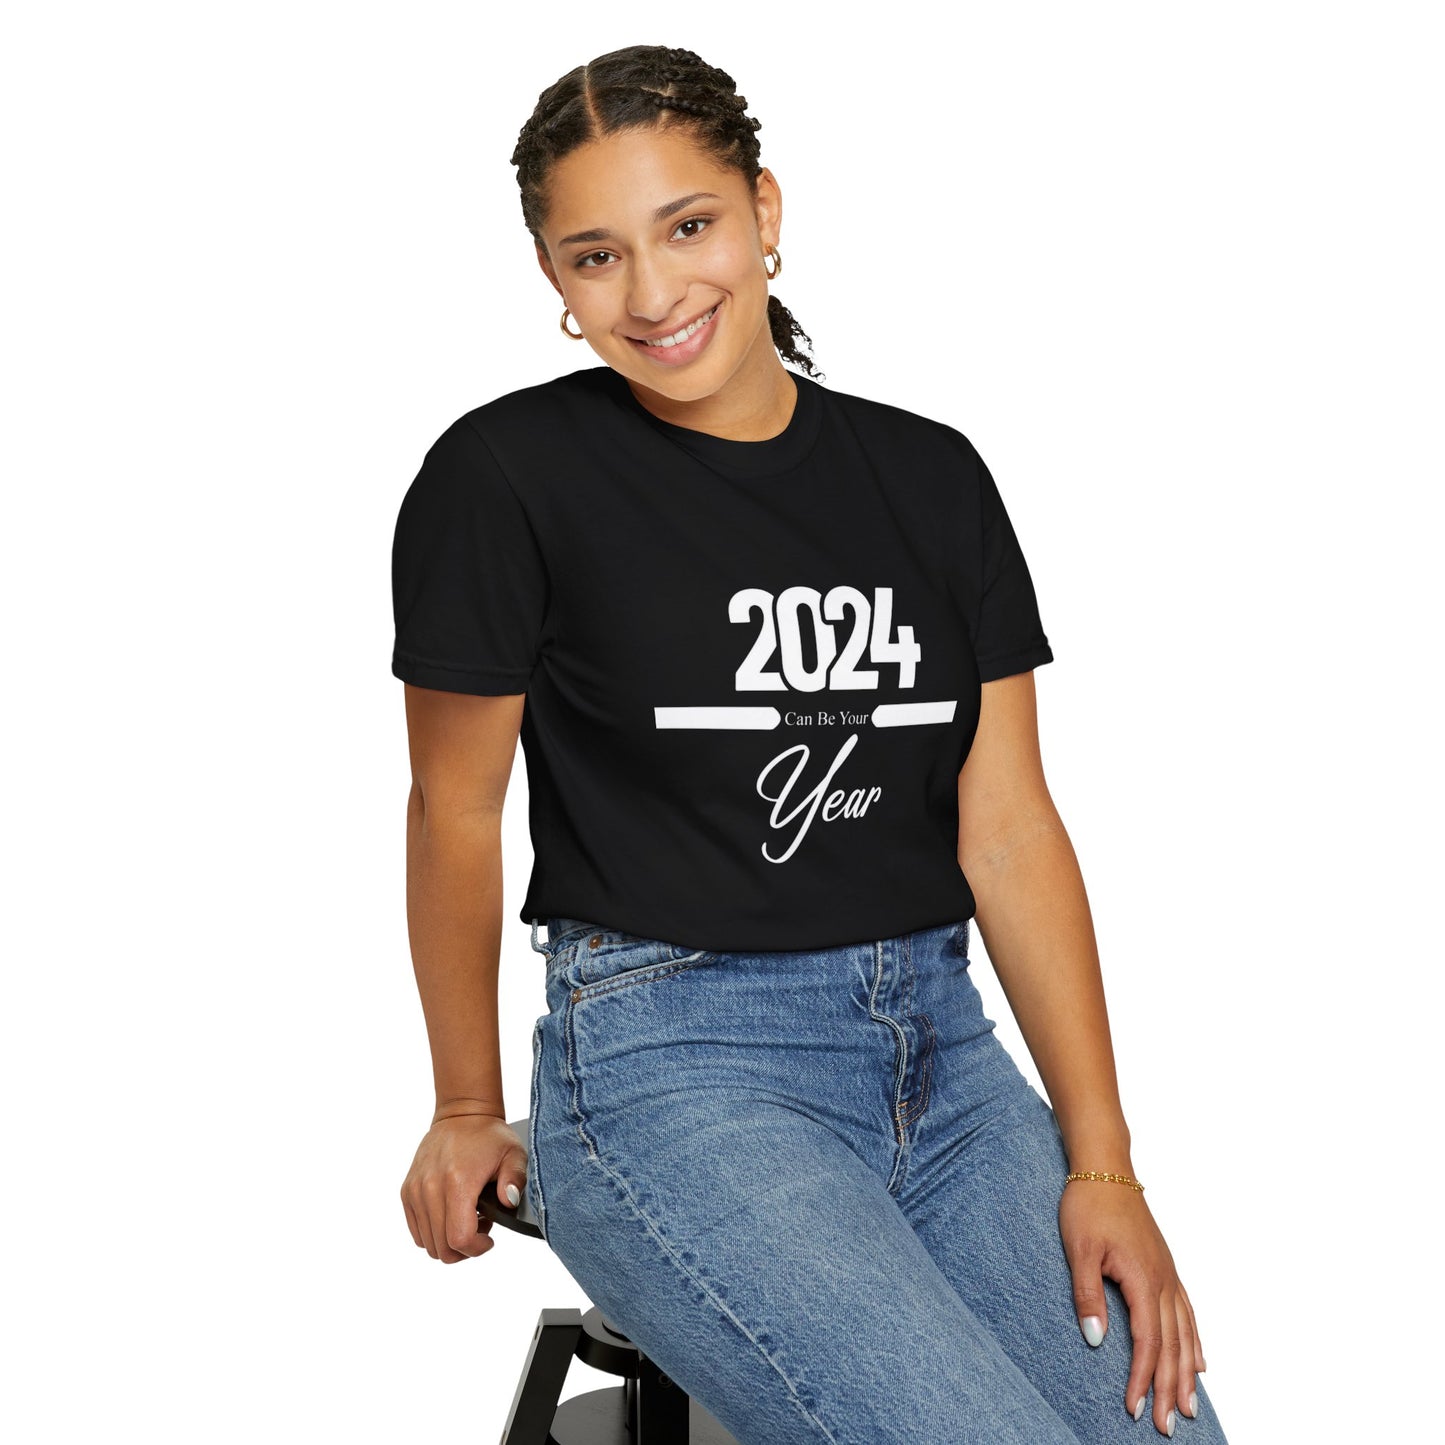 Unisex T-shirt 2024 CAN BE YOUR YEAR